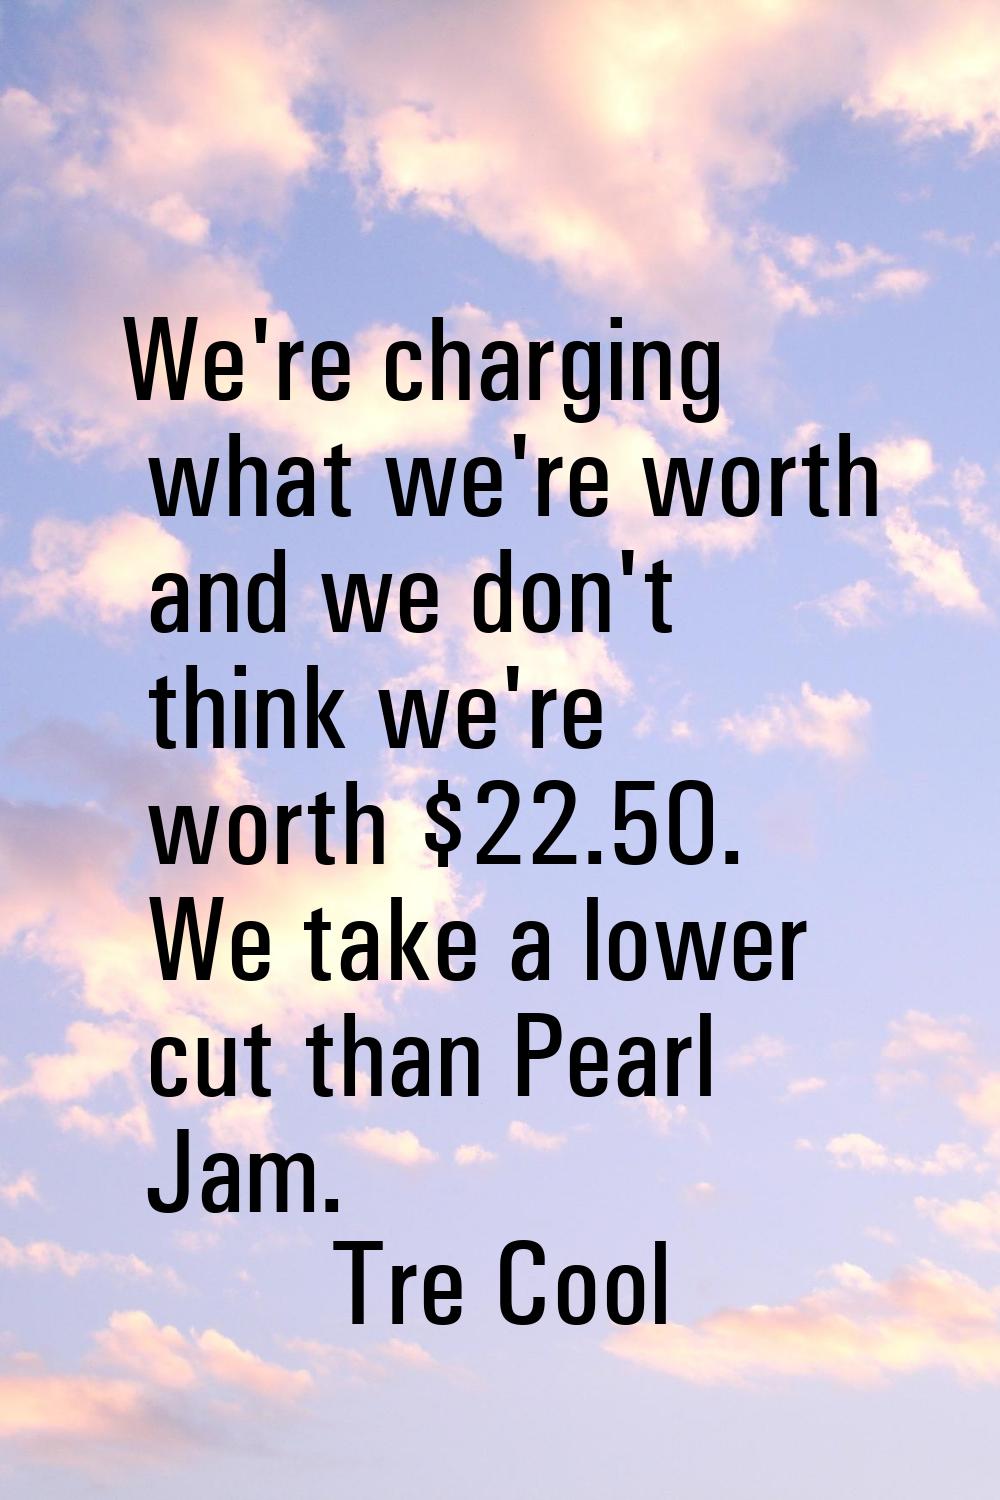 We're charging what we're worth and we don't think we're worth $22.50. We take a lower cut than Pea